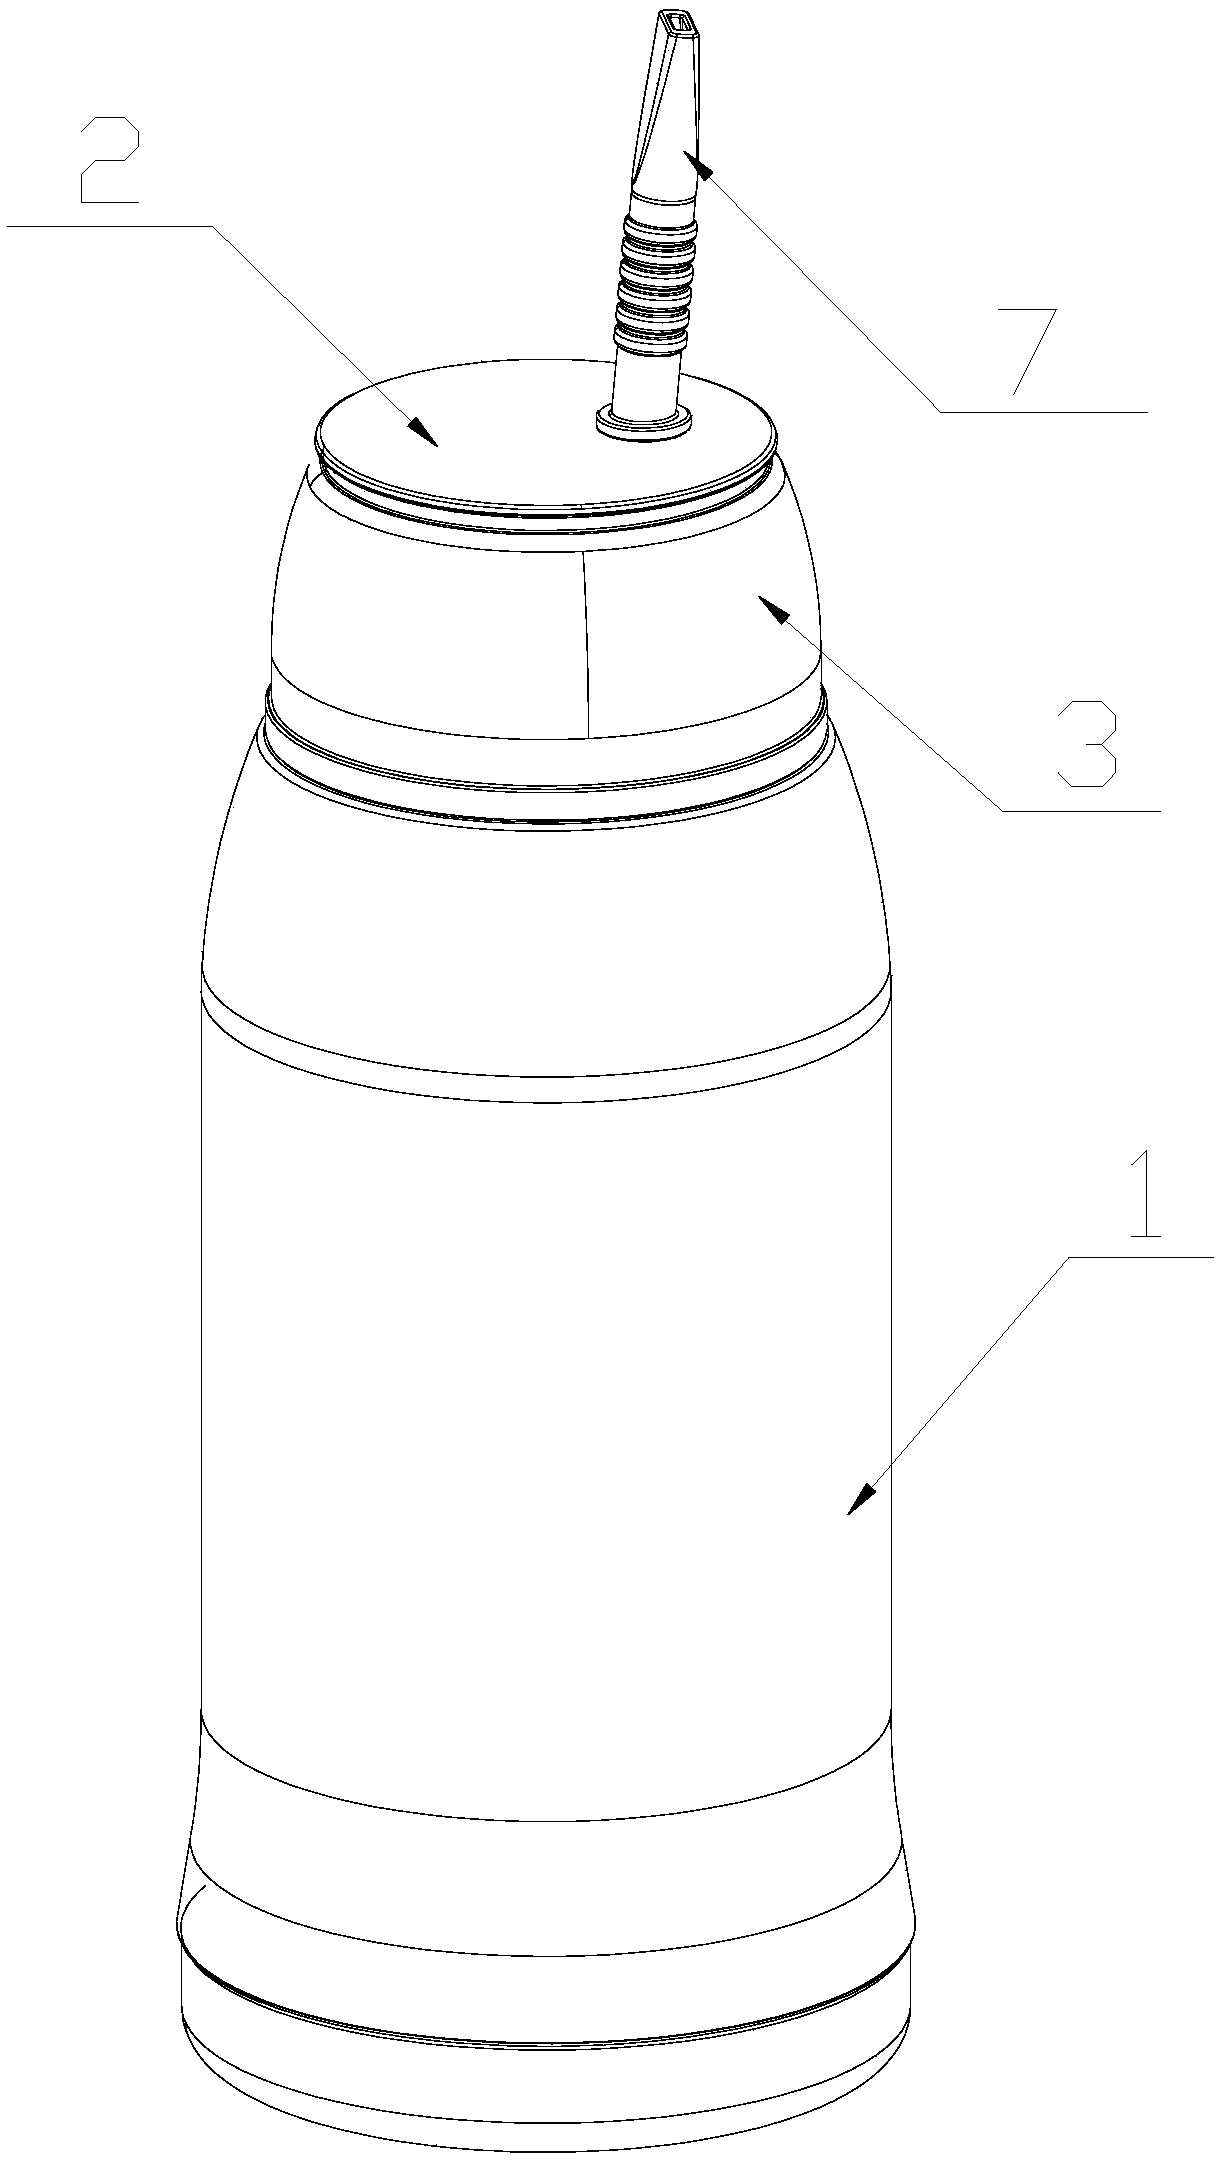 Cup with filtering device